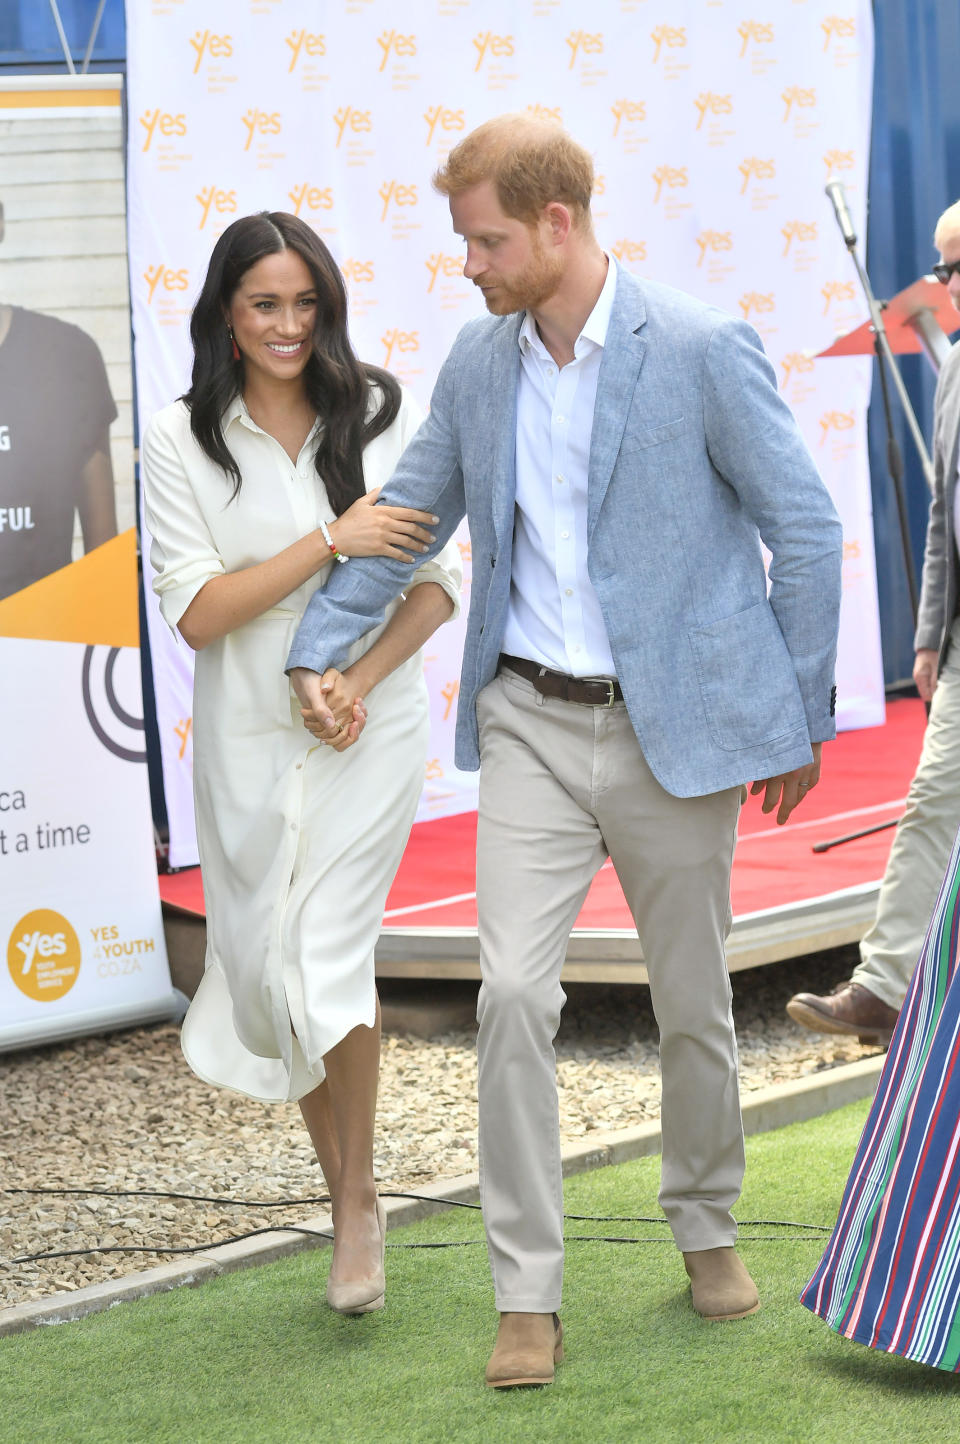 JOHANNESBURG, SOUTH AFRICA - OCTOBER 02: Prince Harry, Duke of Sussex and Meghan, Duchess of Sussex visit the township of Tembisa during their royal tour of South Africa on October 02, 2019 in Various Cities, South Africa. (Photo by Samir Hussein/WireImage)